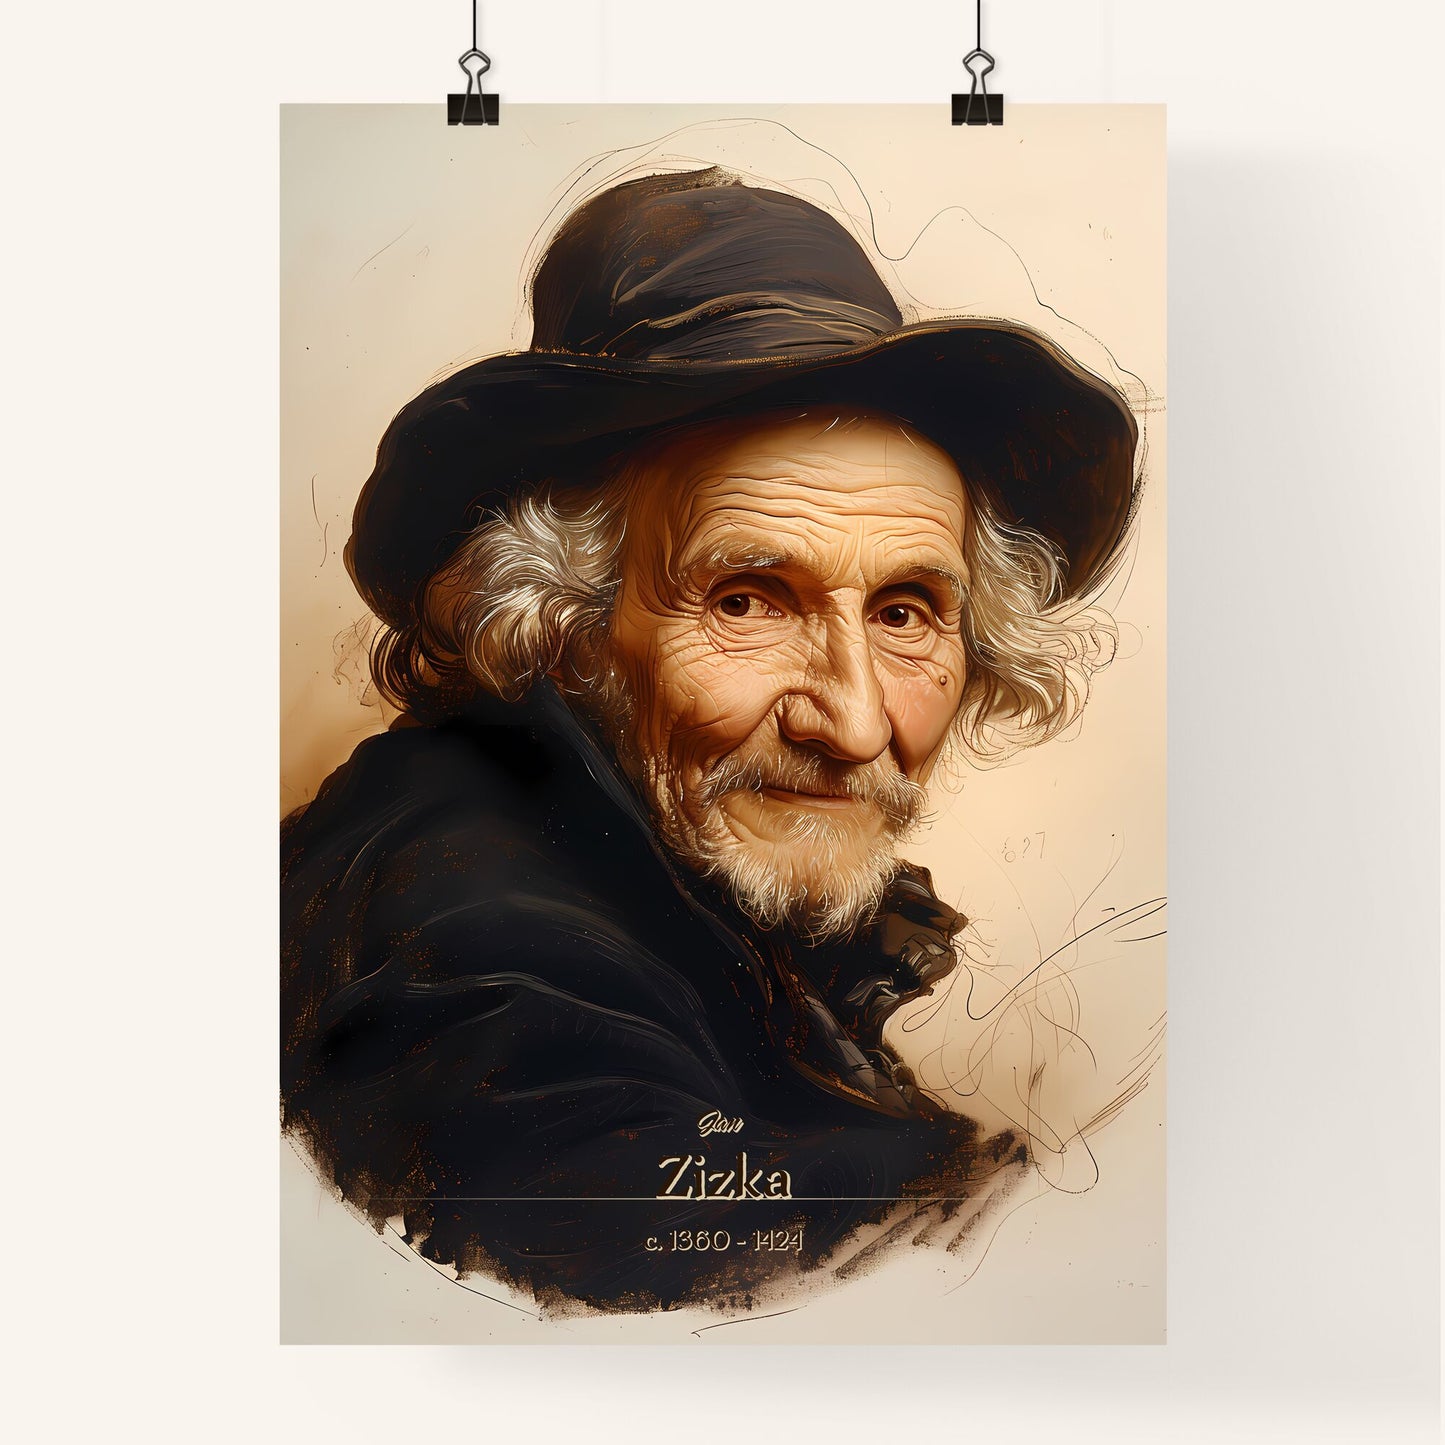 Jan, Zizka, c. 1360 - 1424, A Poster of a man with a hat Default Title